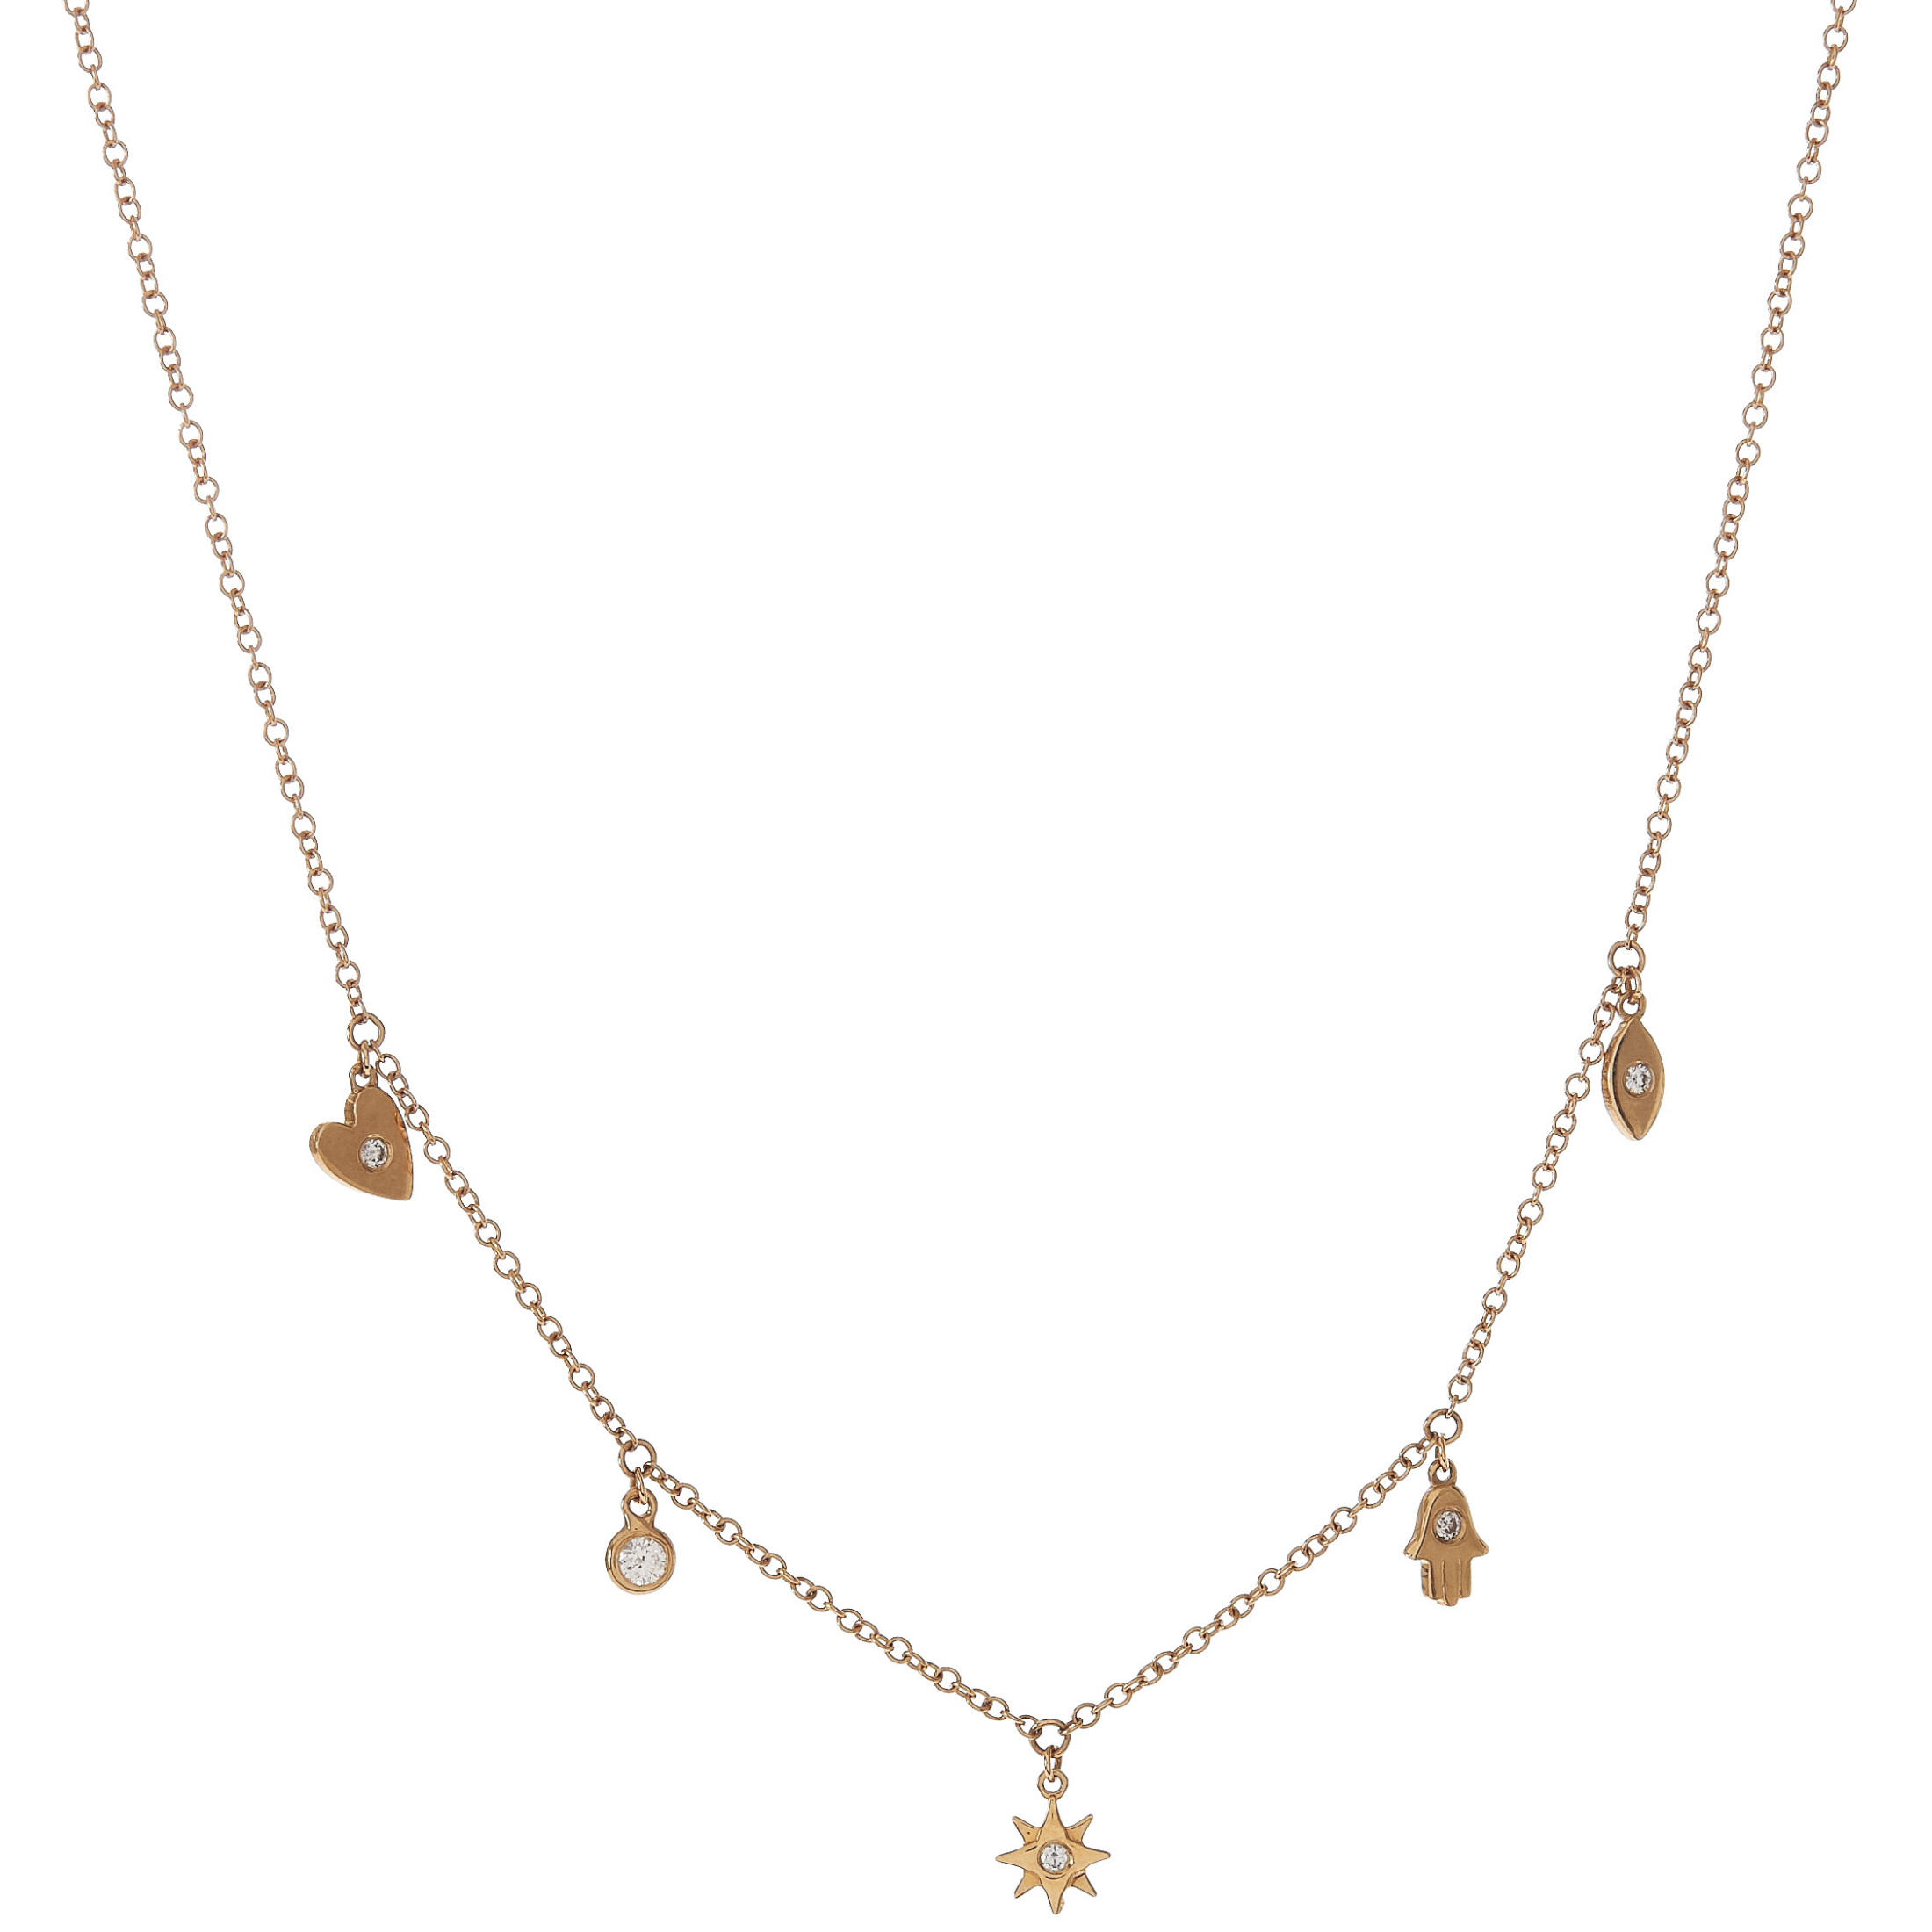 24K 995 Pure Gold Necklace with CZ Pendant for Women - 1-1-GN-V00590 in  6.050 Grams